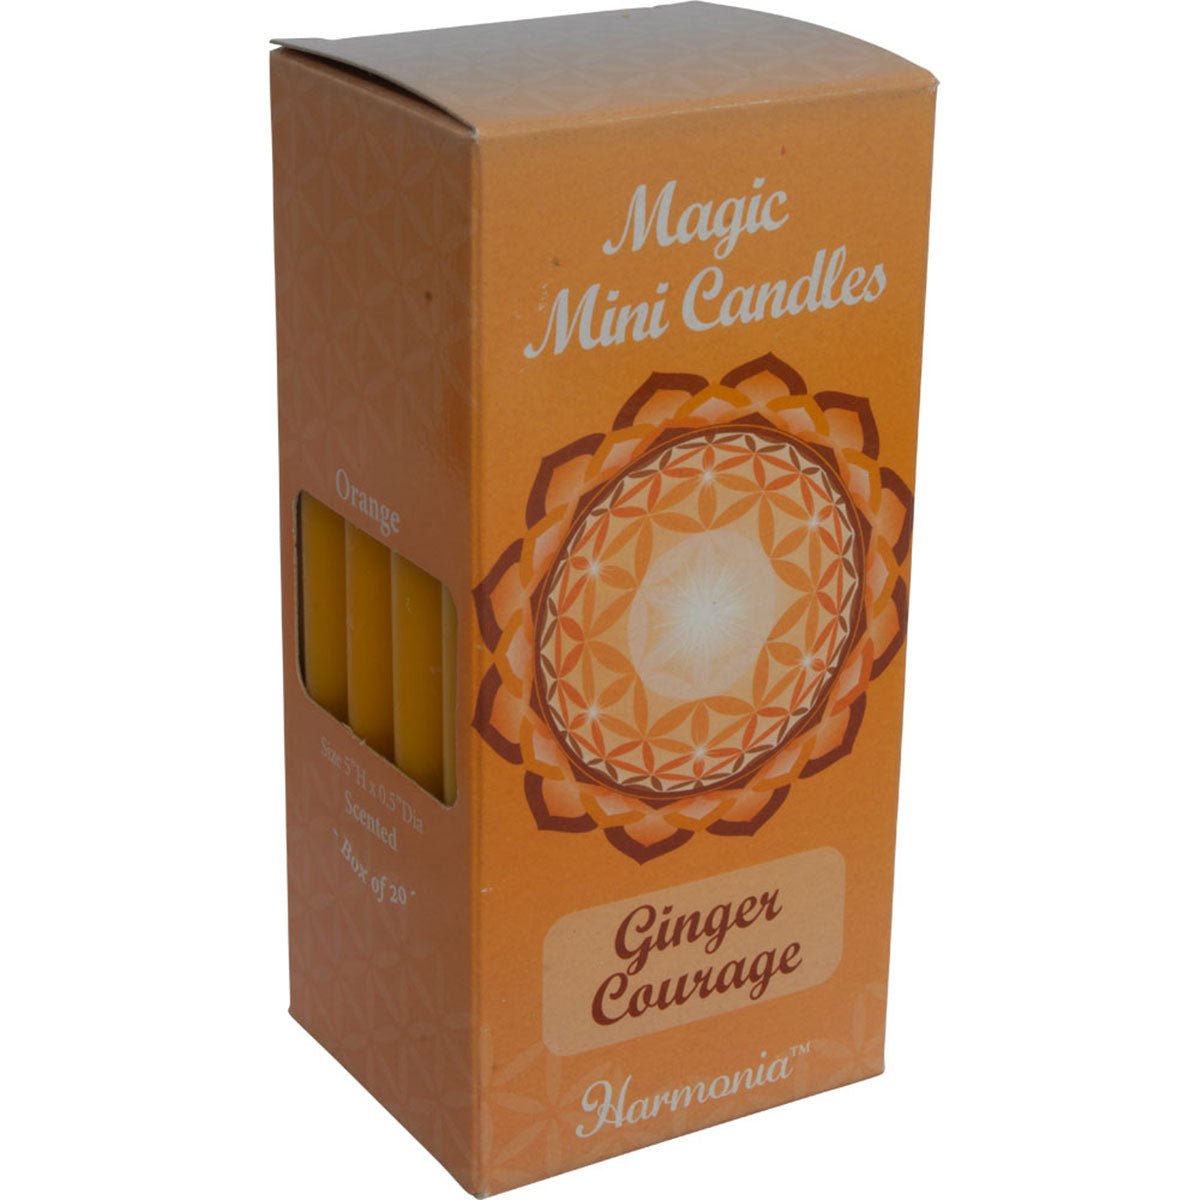 Courage Ginger Candle - 13 Moons